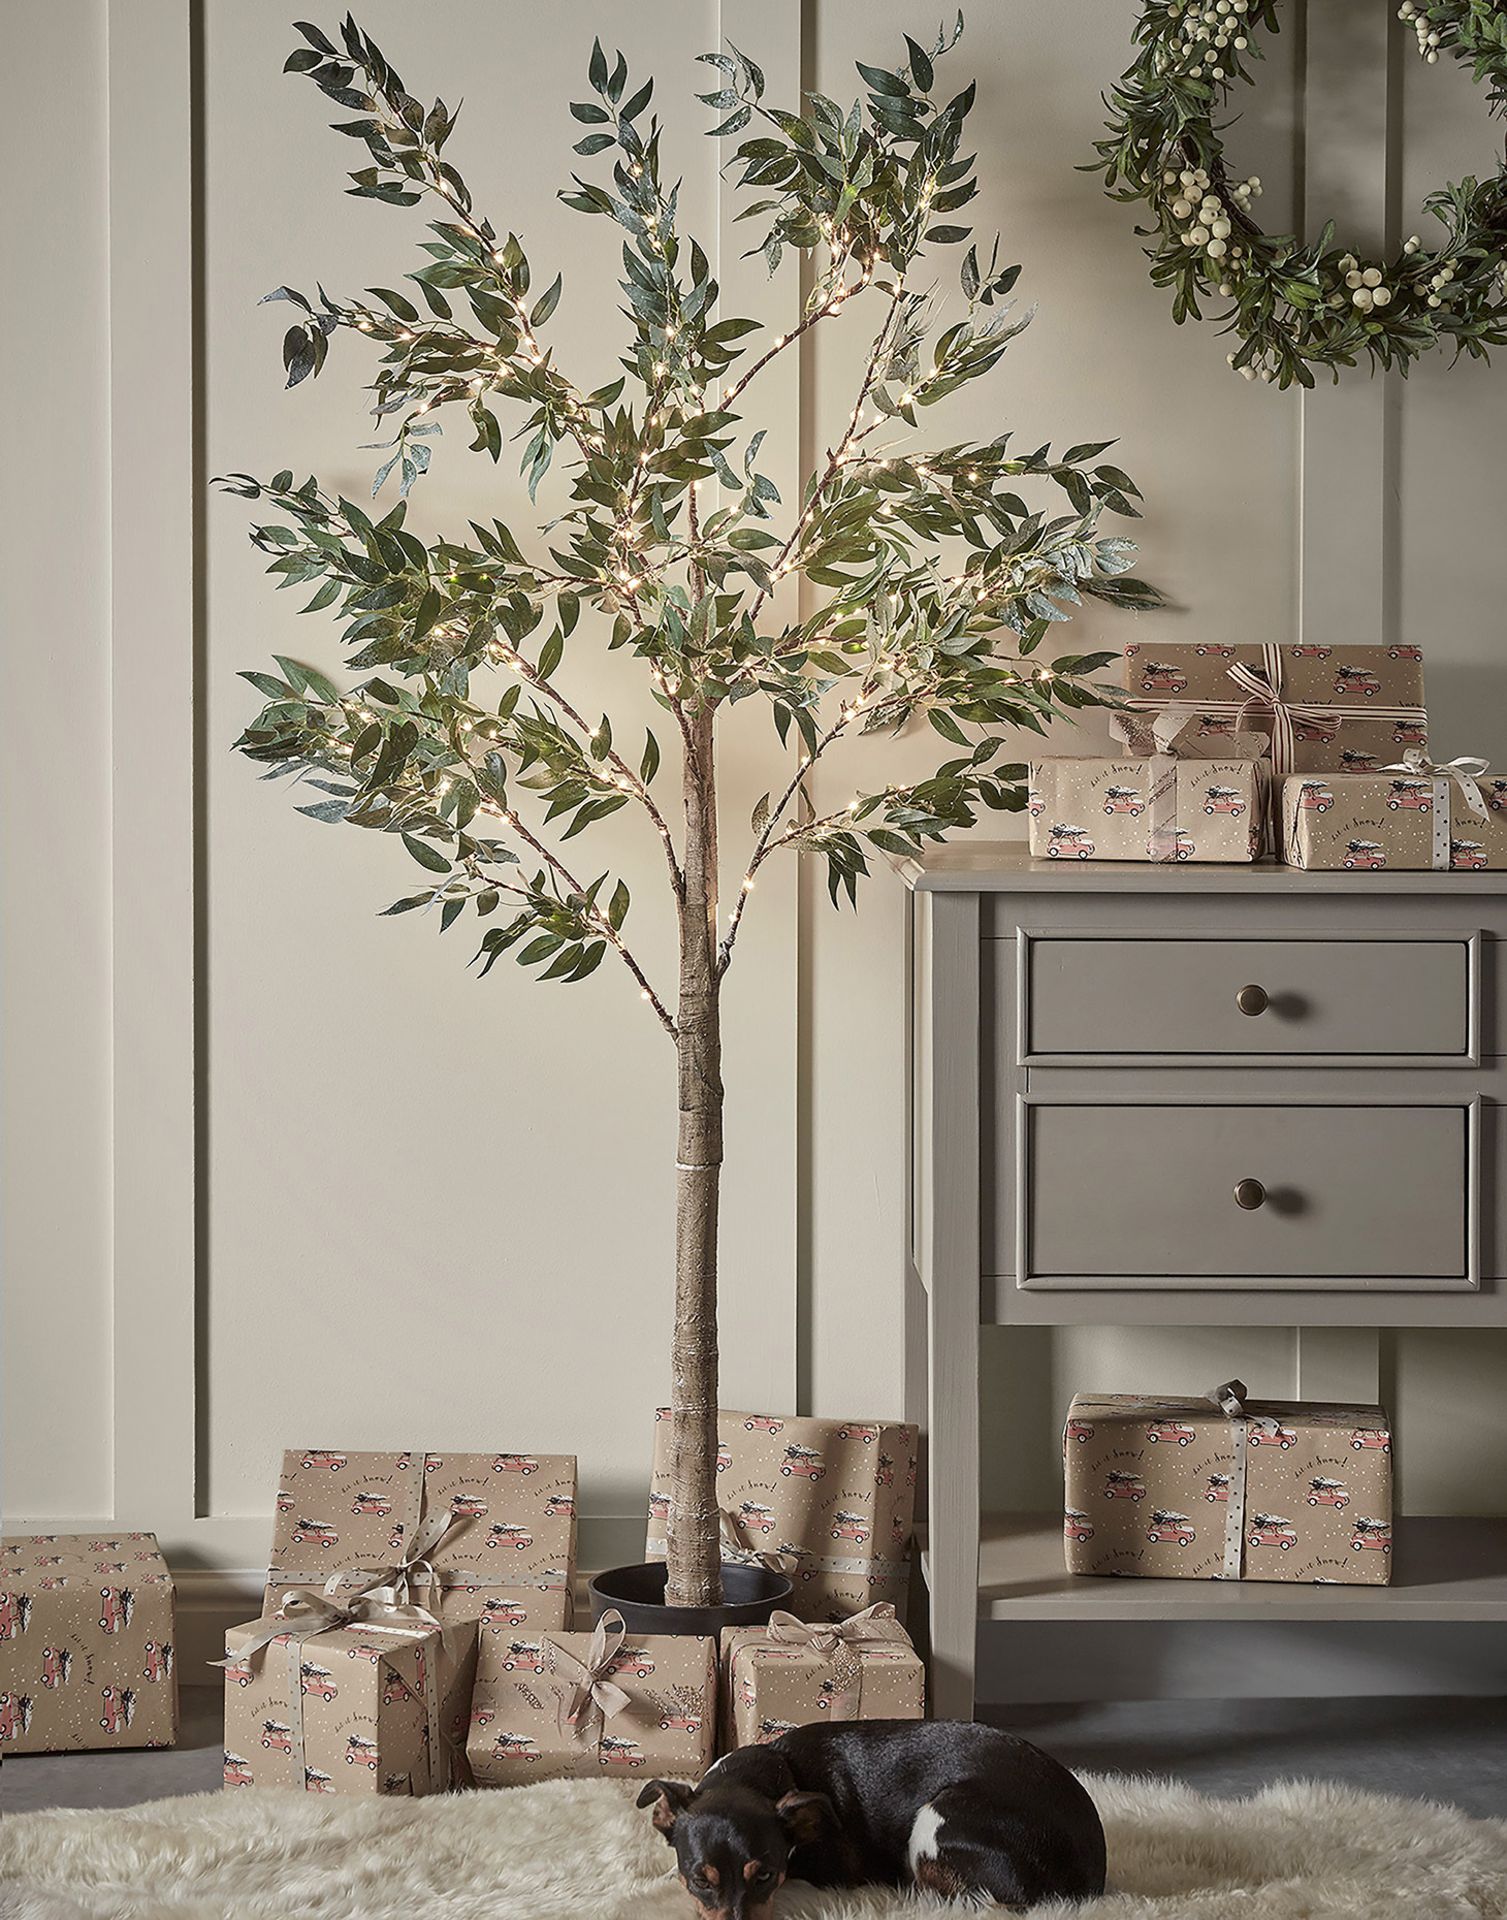 Cox & Cox Indoor Outdoor Pre-Lit Faux Olive Tree. RRP £215.00. This impressive Pre-Lit Faux Olive